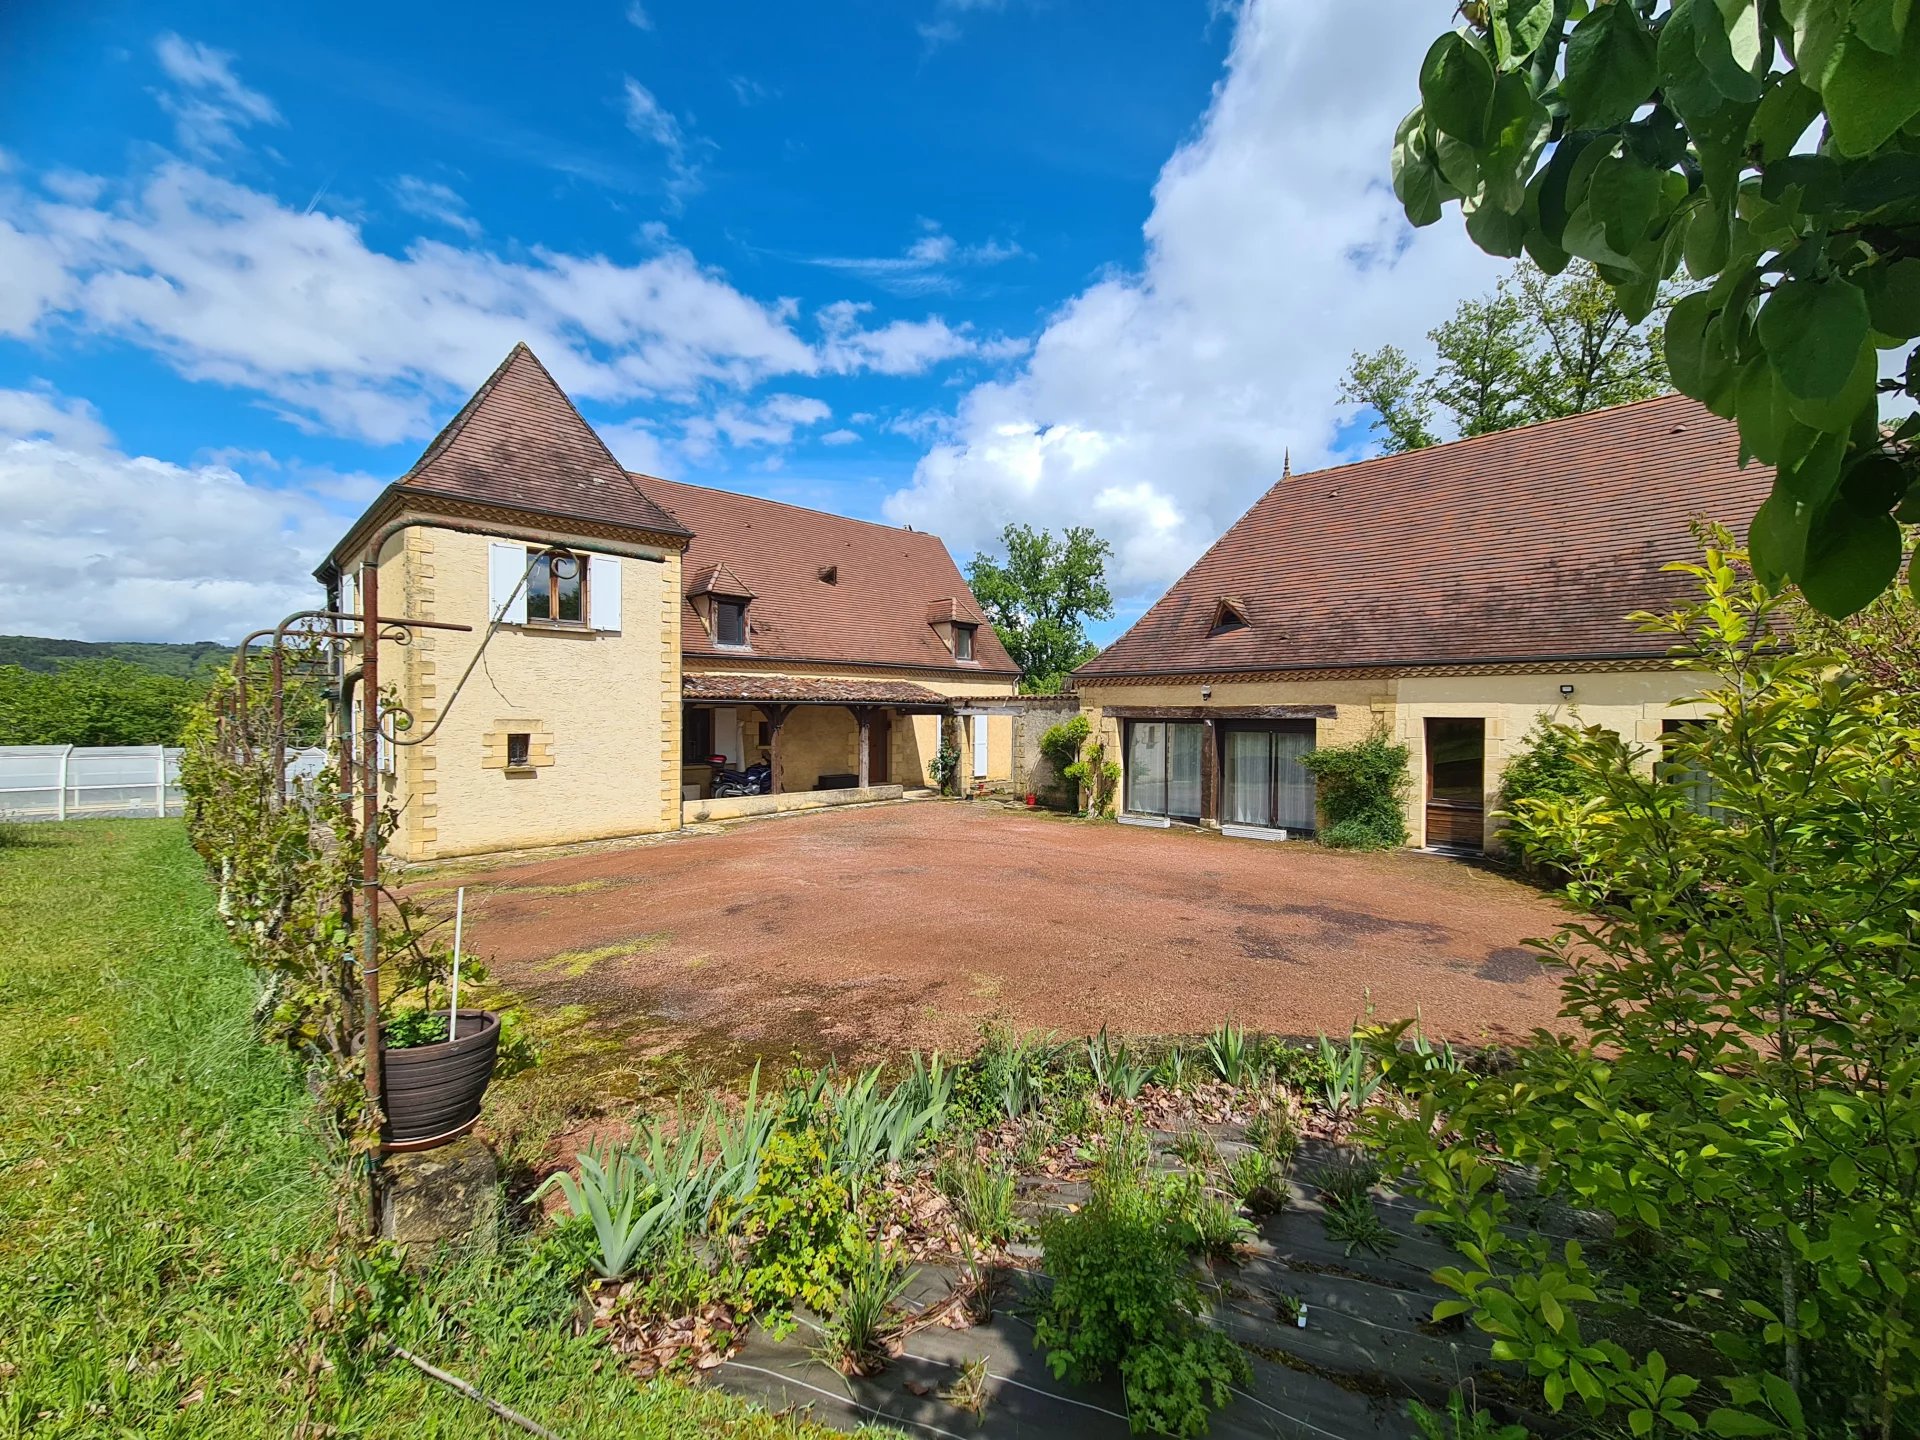 Rare Stone house and gite on the hill of Chateau Milandes, few minutes to Sarlat